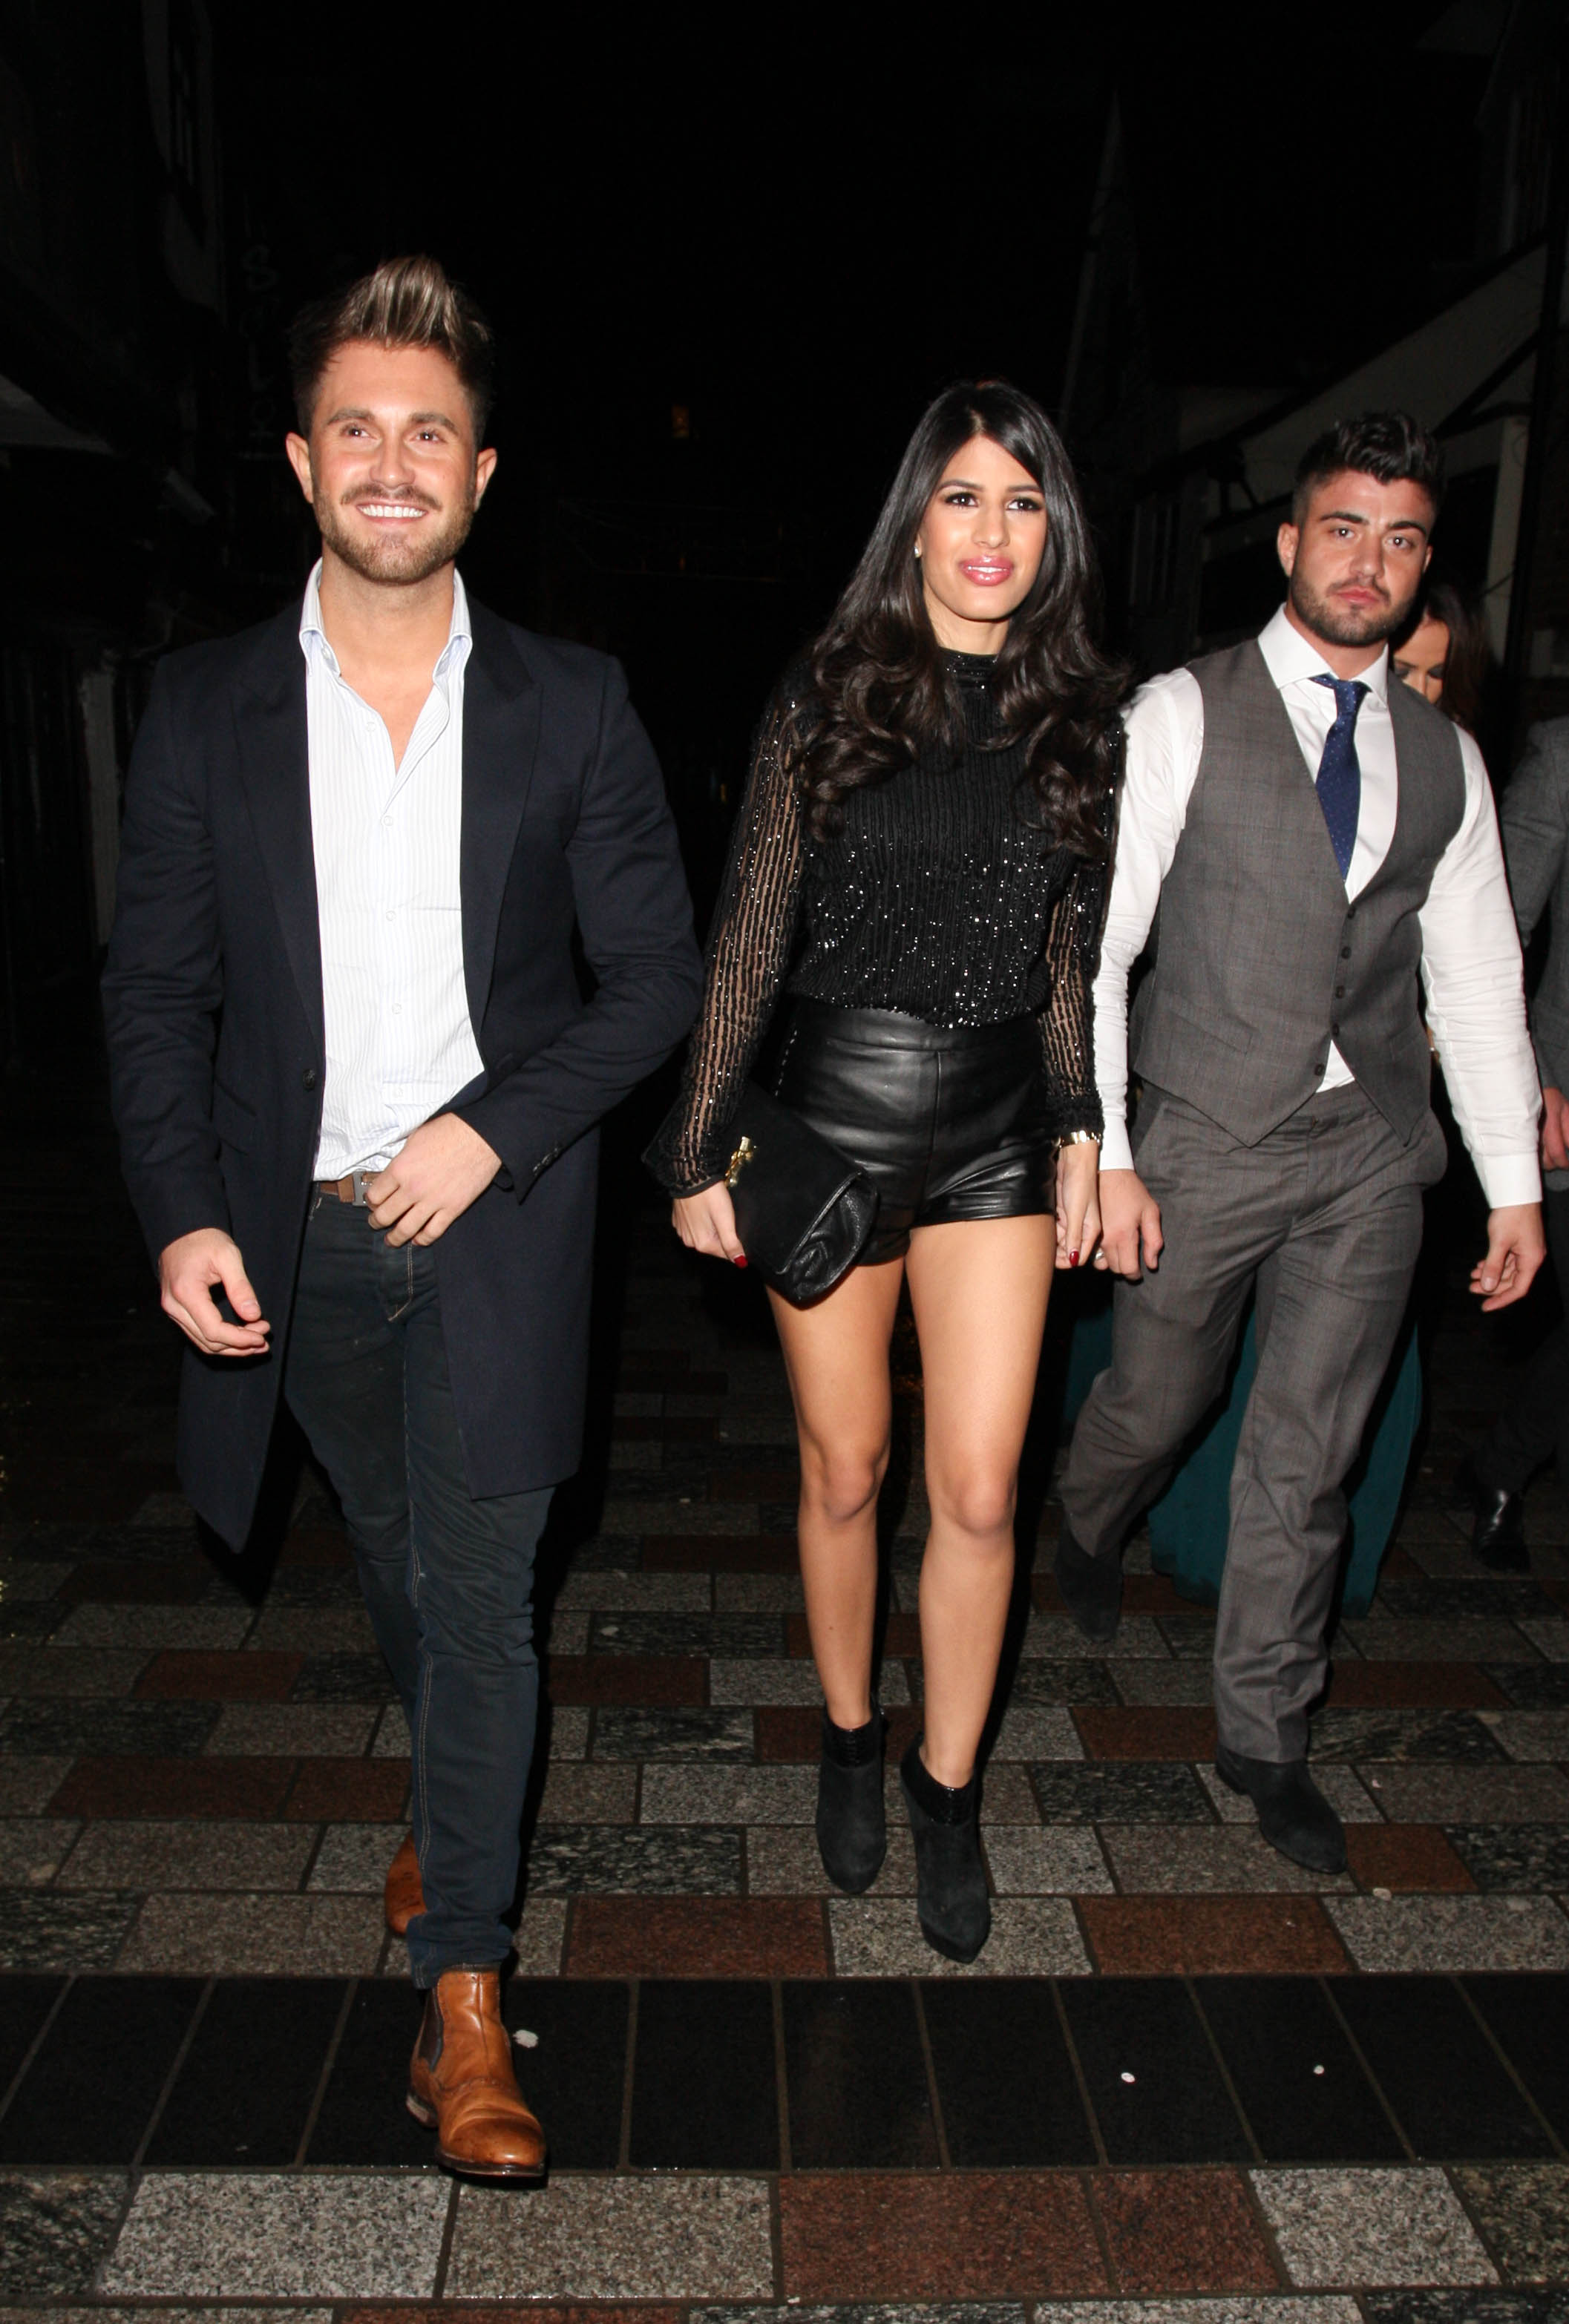 Jasmin Walia out in Maidstone Kent